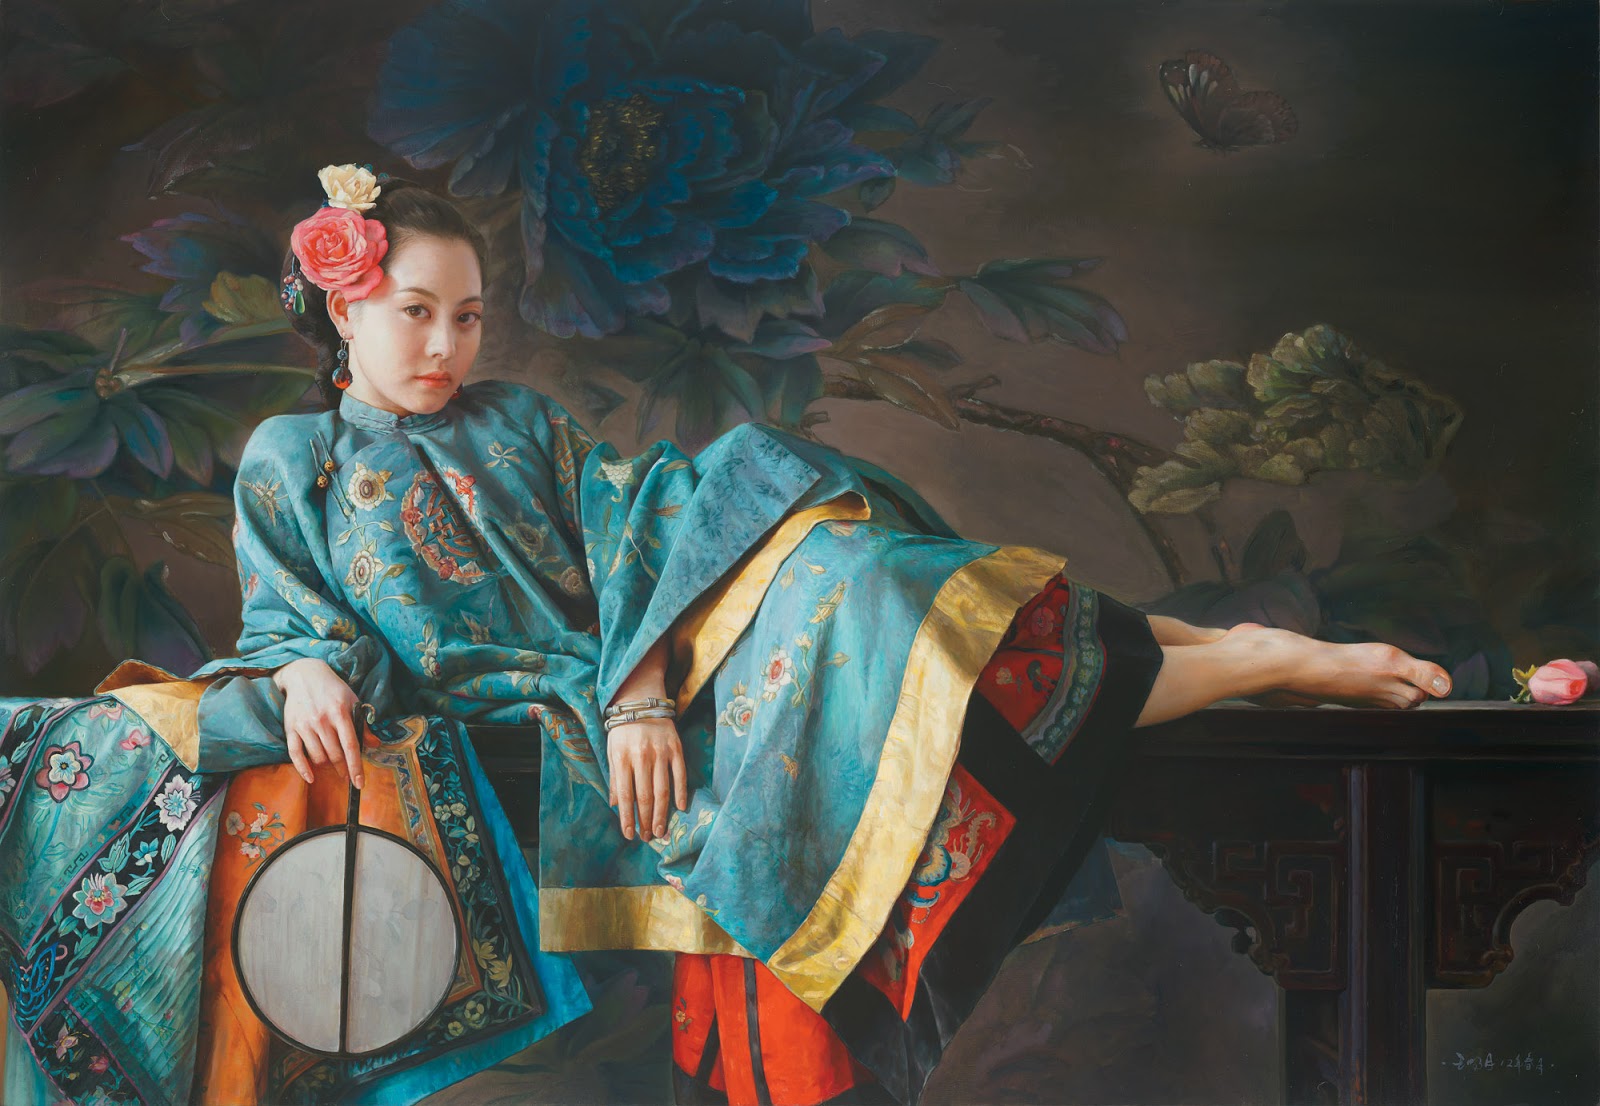 Wang Ming Yue | Realist painter | The Gallerist